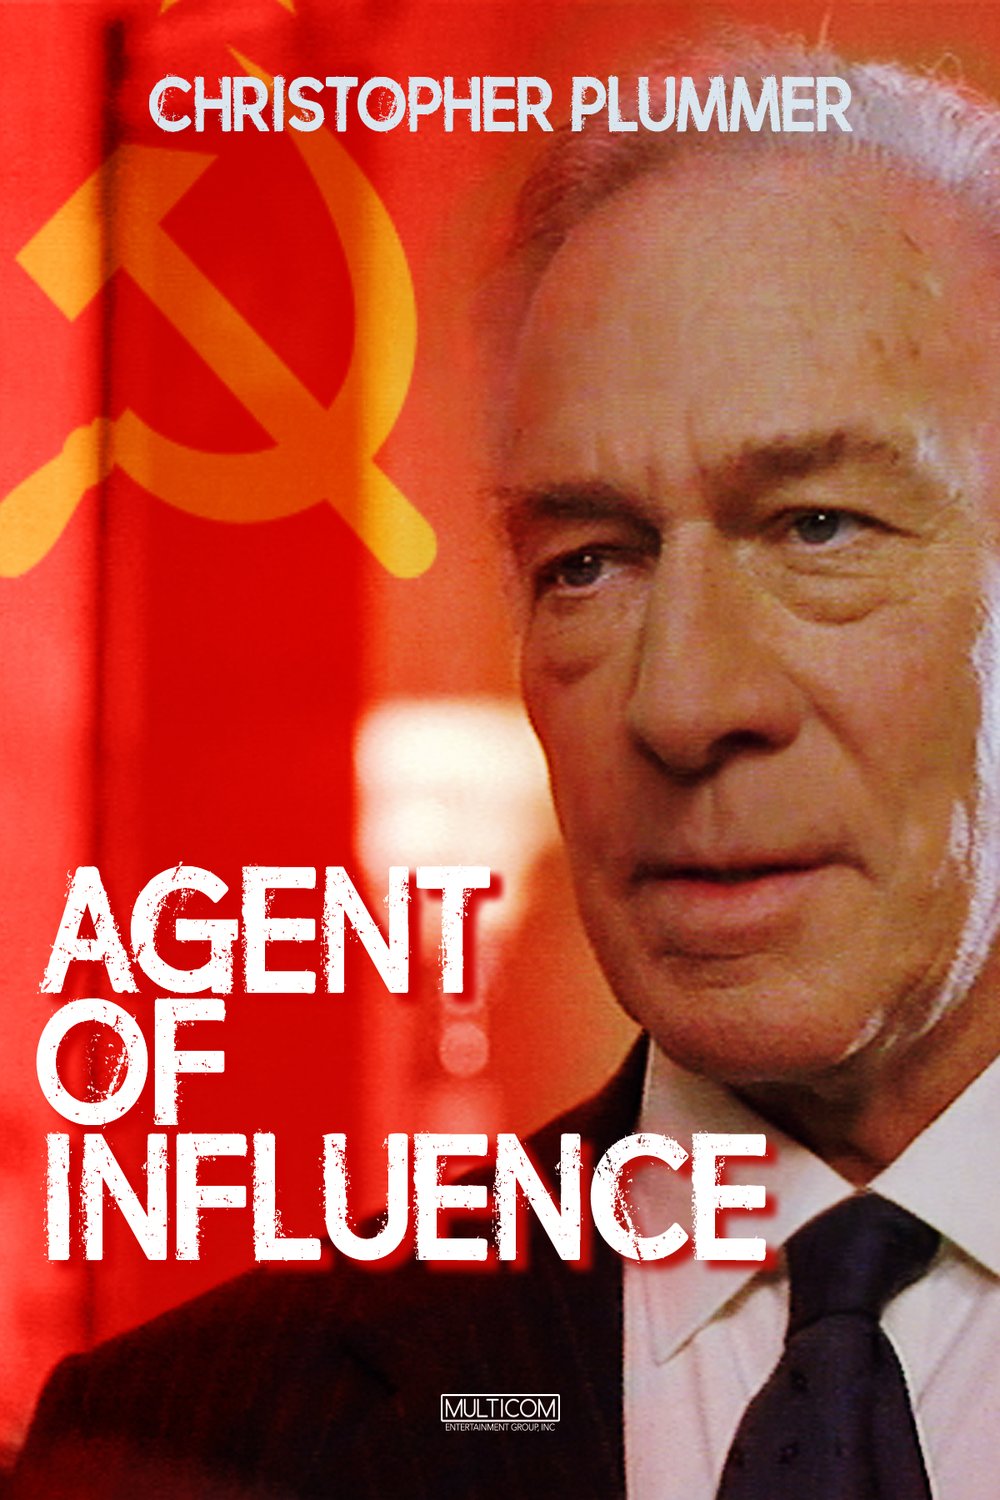 Poster of the movie Agent of Influence